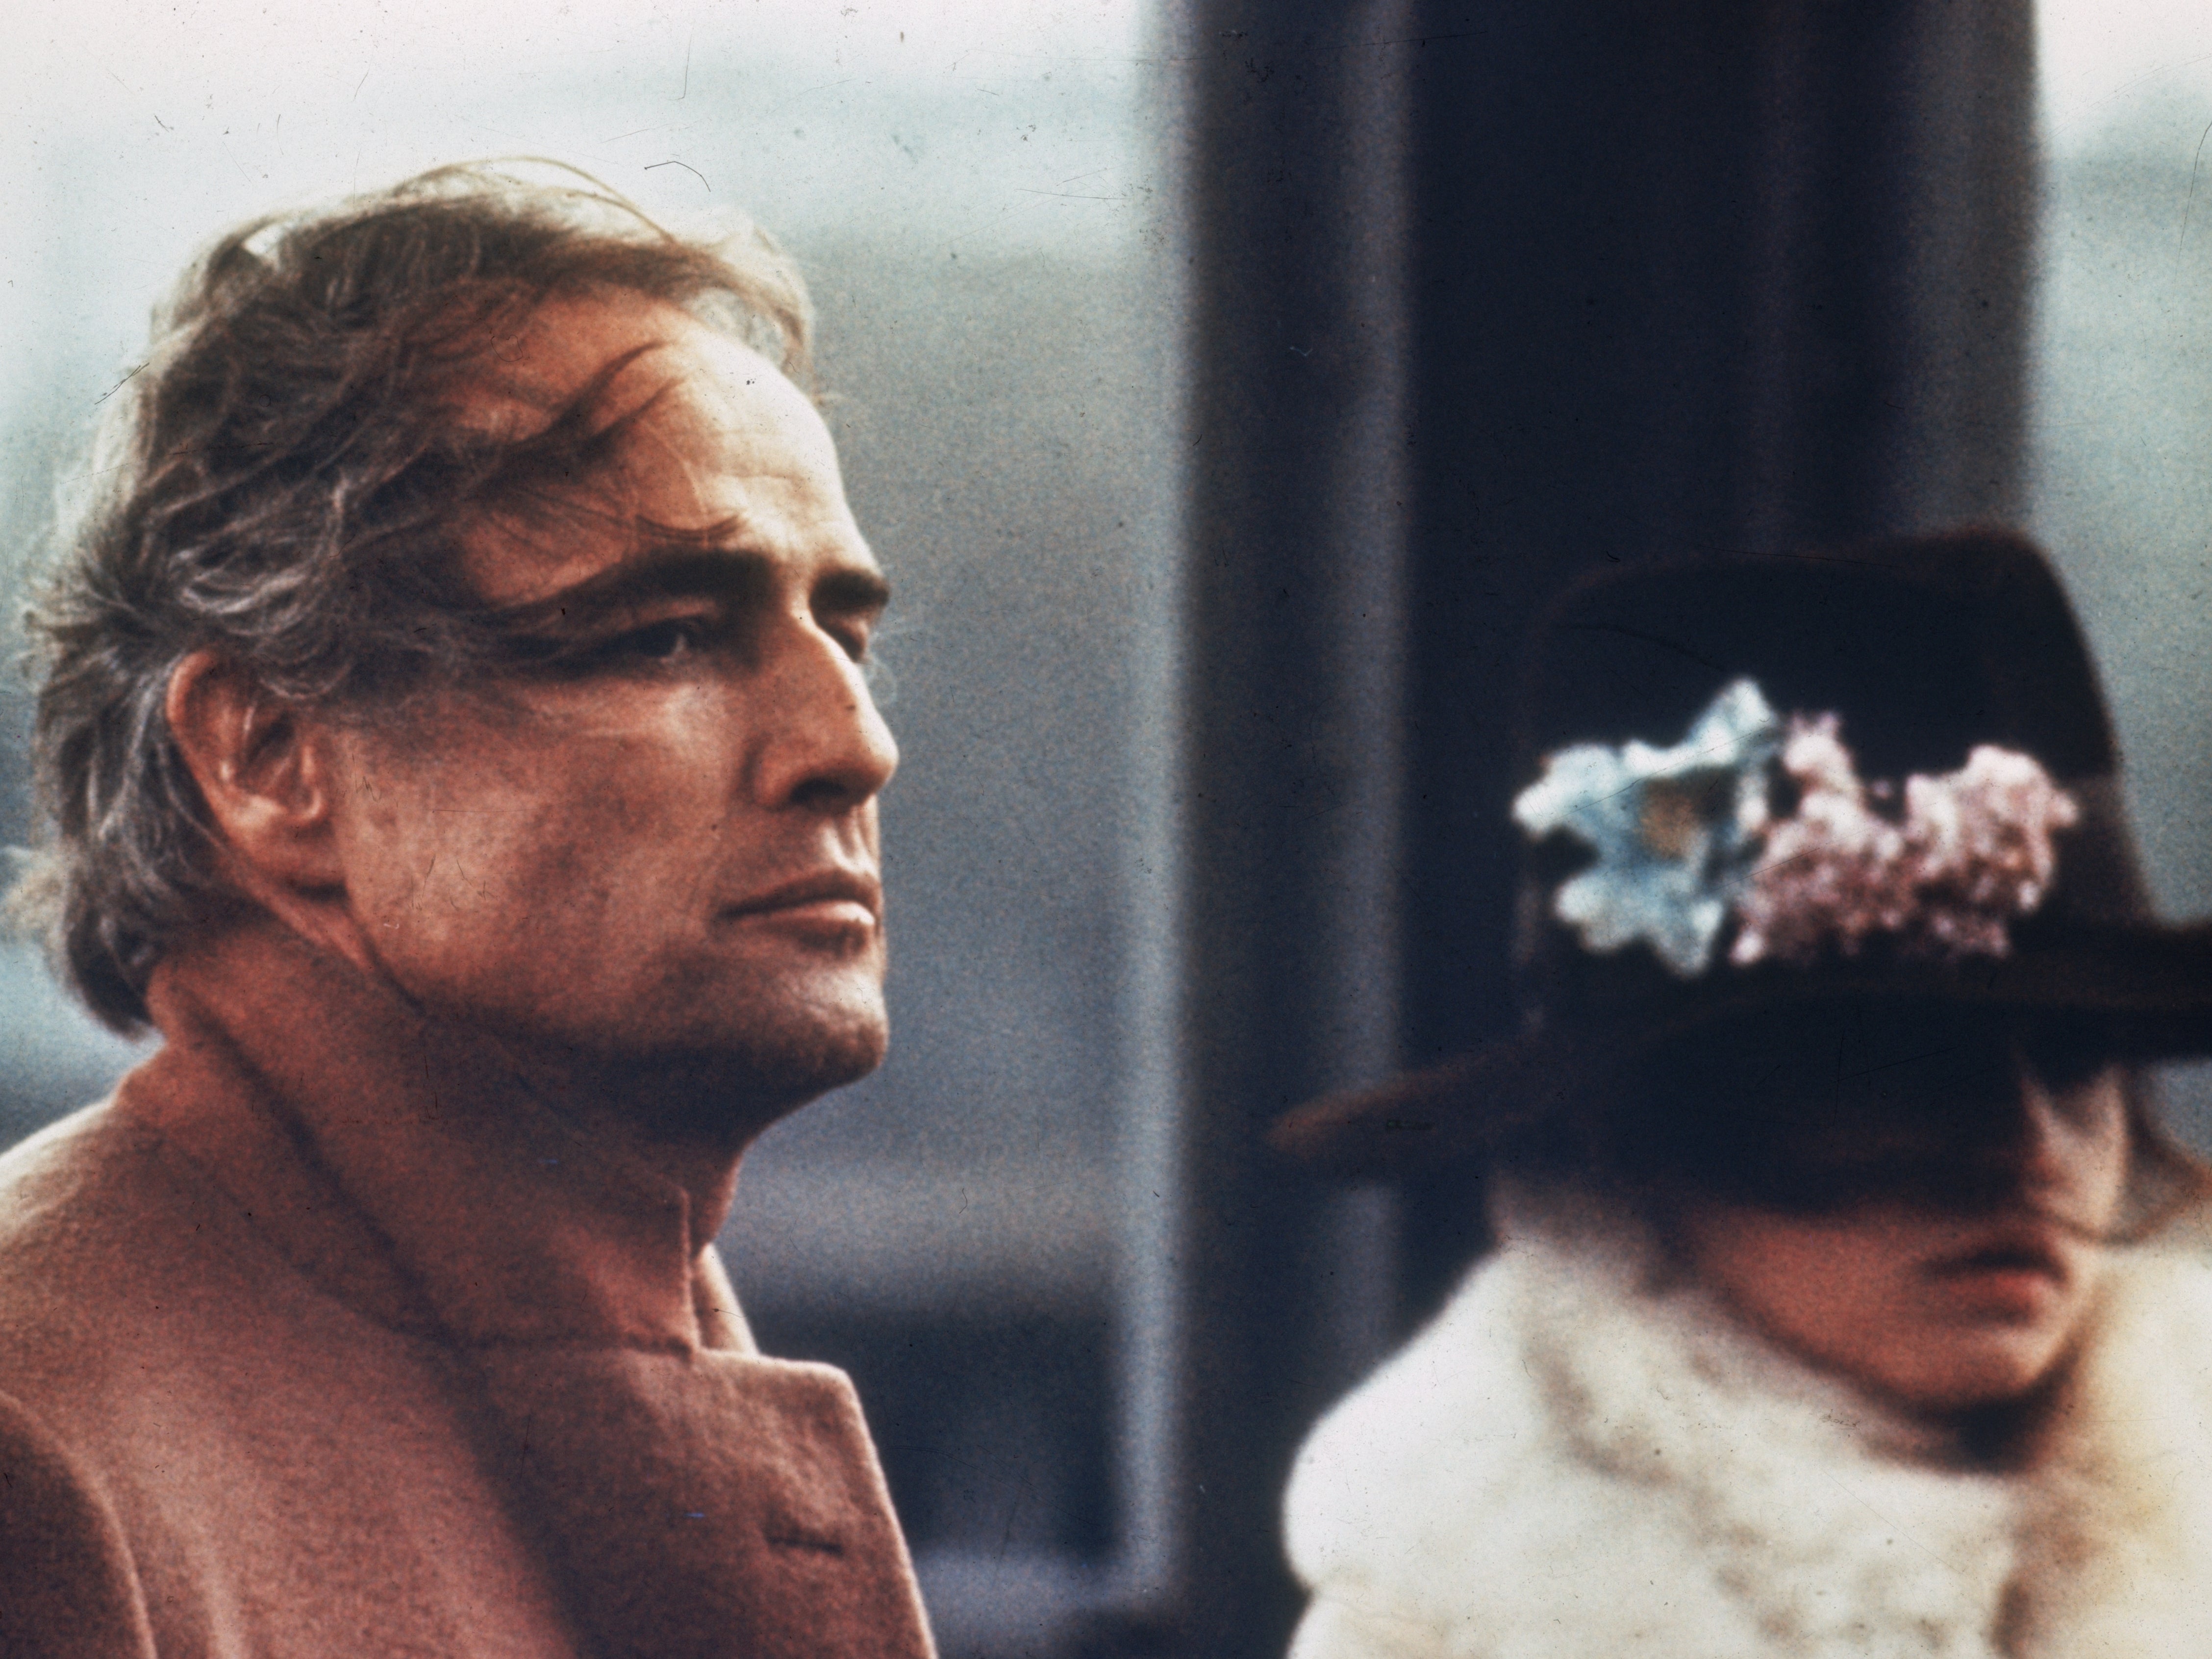 The ‘Last Tango in Paris’ rape scene is one of the most infamous in film history